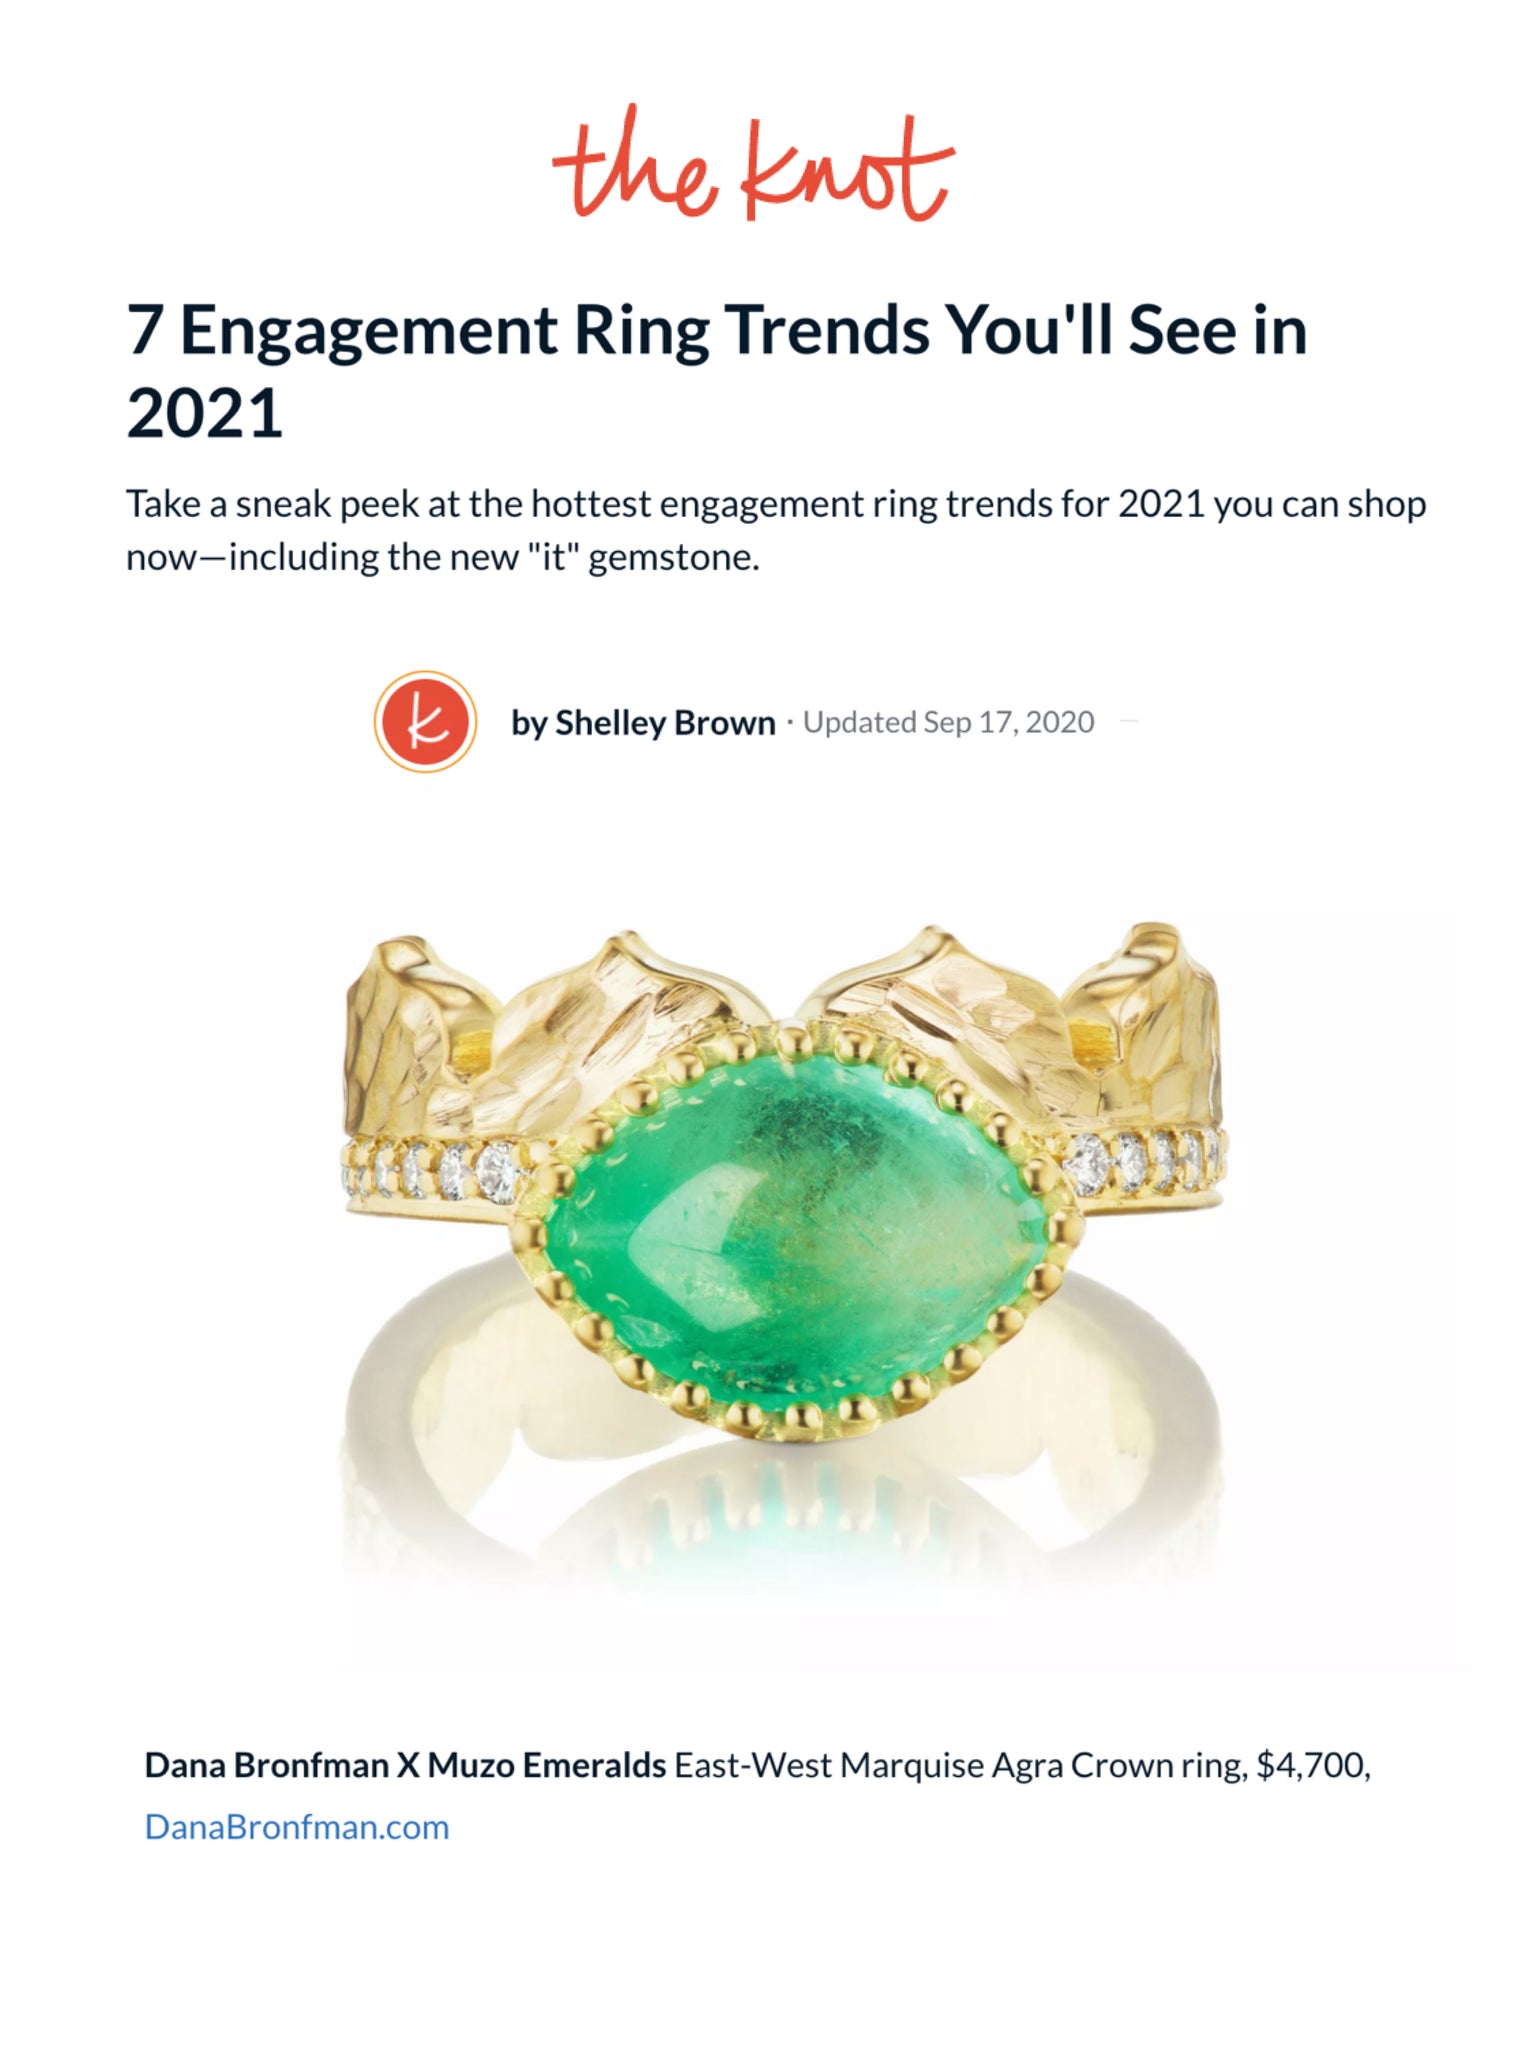 Dana Bronfman Emerald Crown Ring Featured on theknot.com